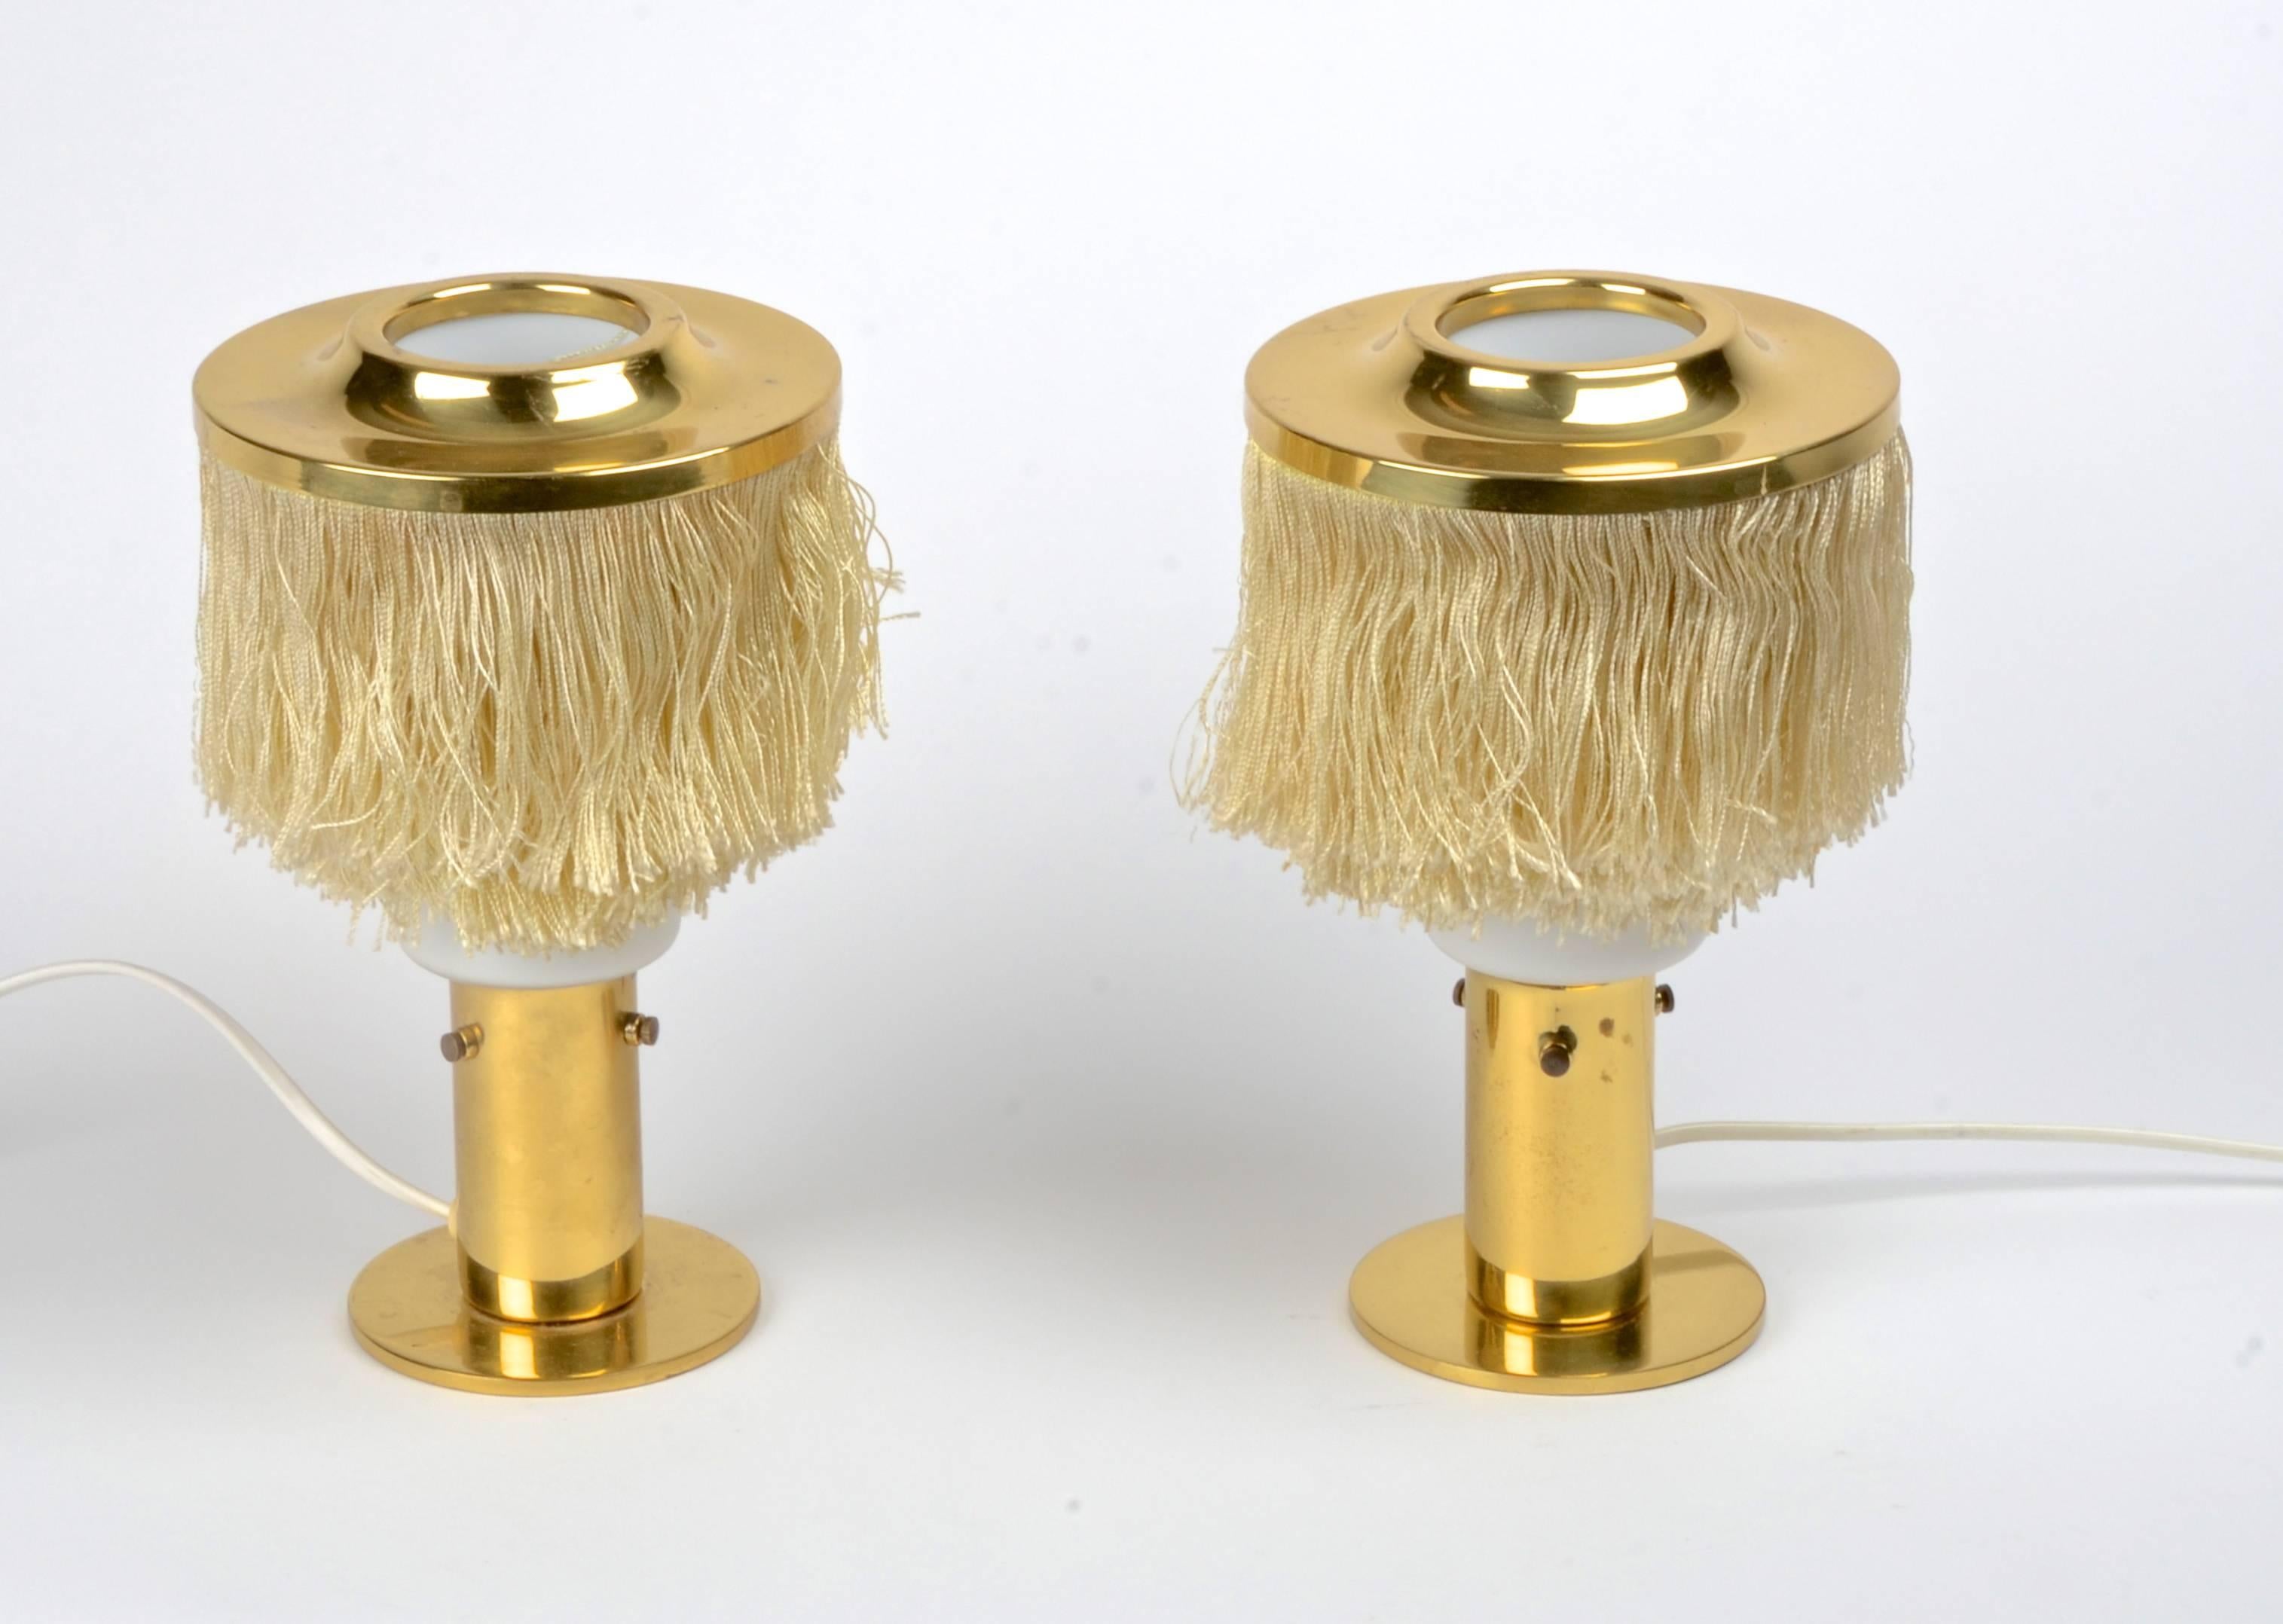 Table lamps in brass with silk fringe, designed by Hans-Agne Jakobsson for Markaryd, Sweden, 1960s.